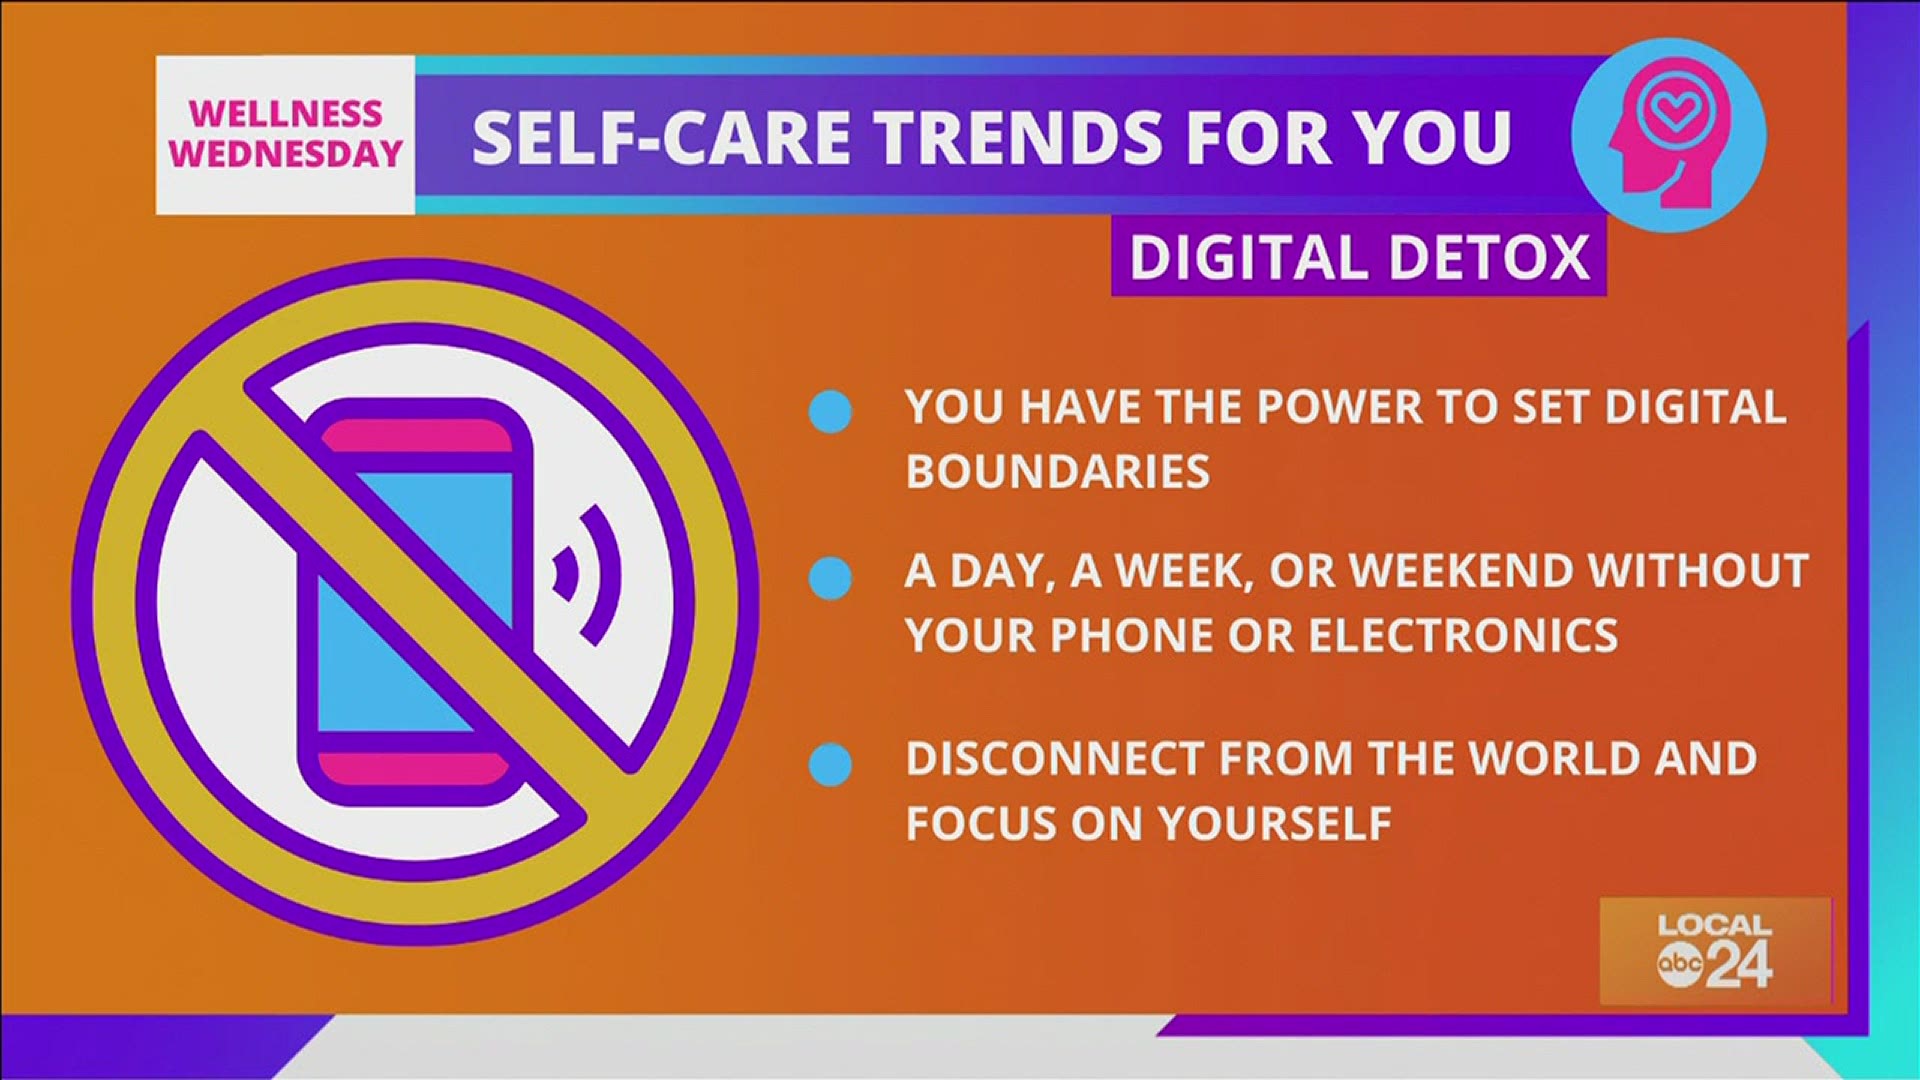 From digital detoxes to exercise routines, get out of the pandemic rut with these self-care tips! Starring Sydney Neely on "The Shortcut!"